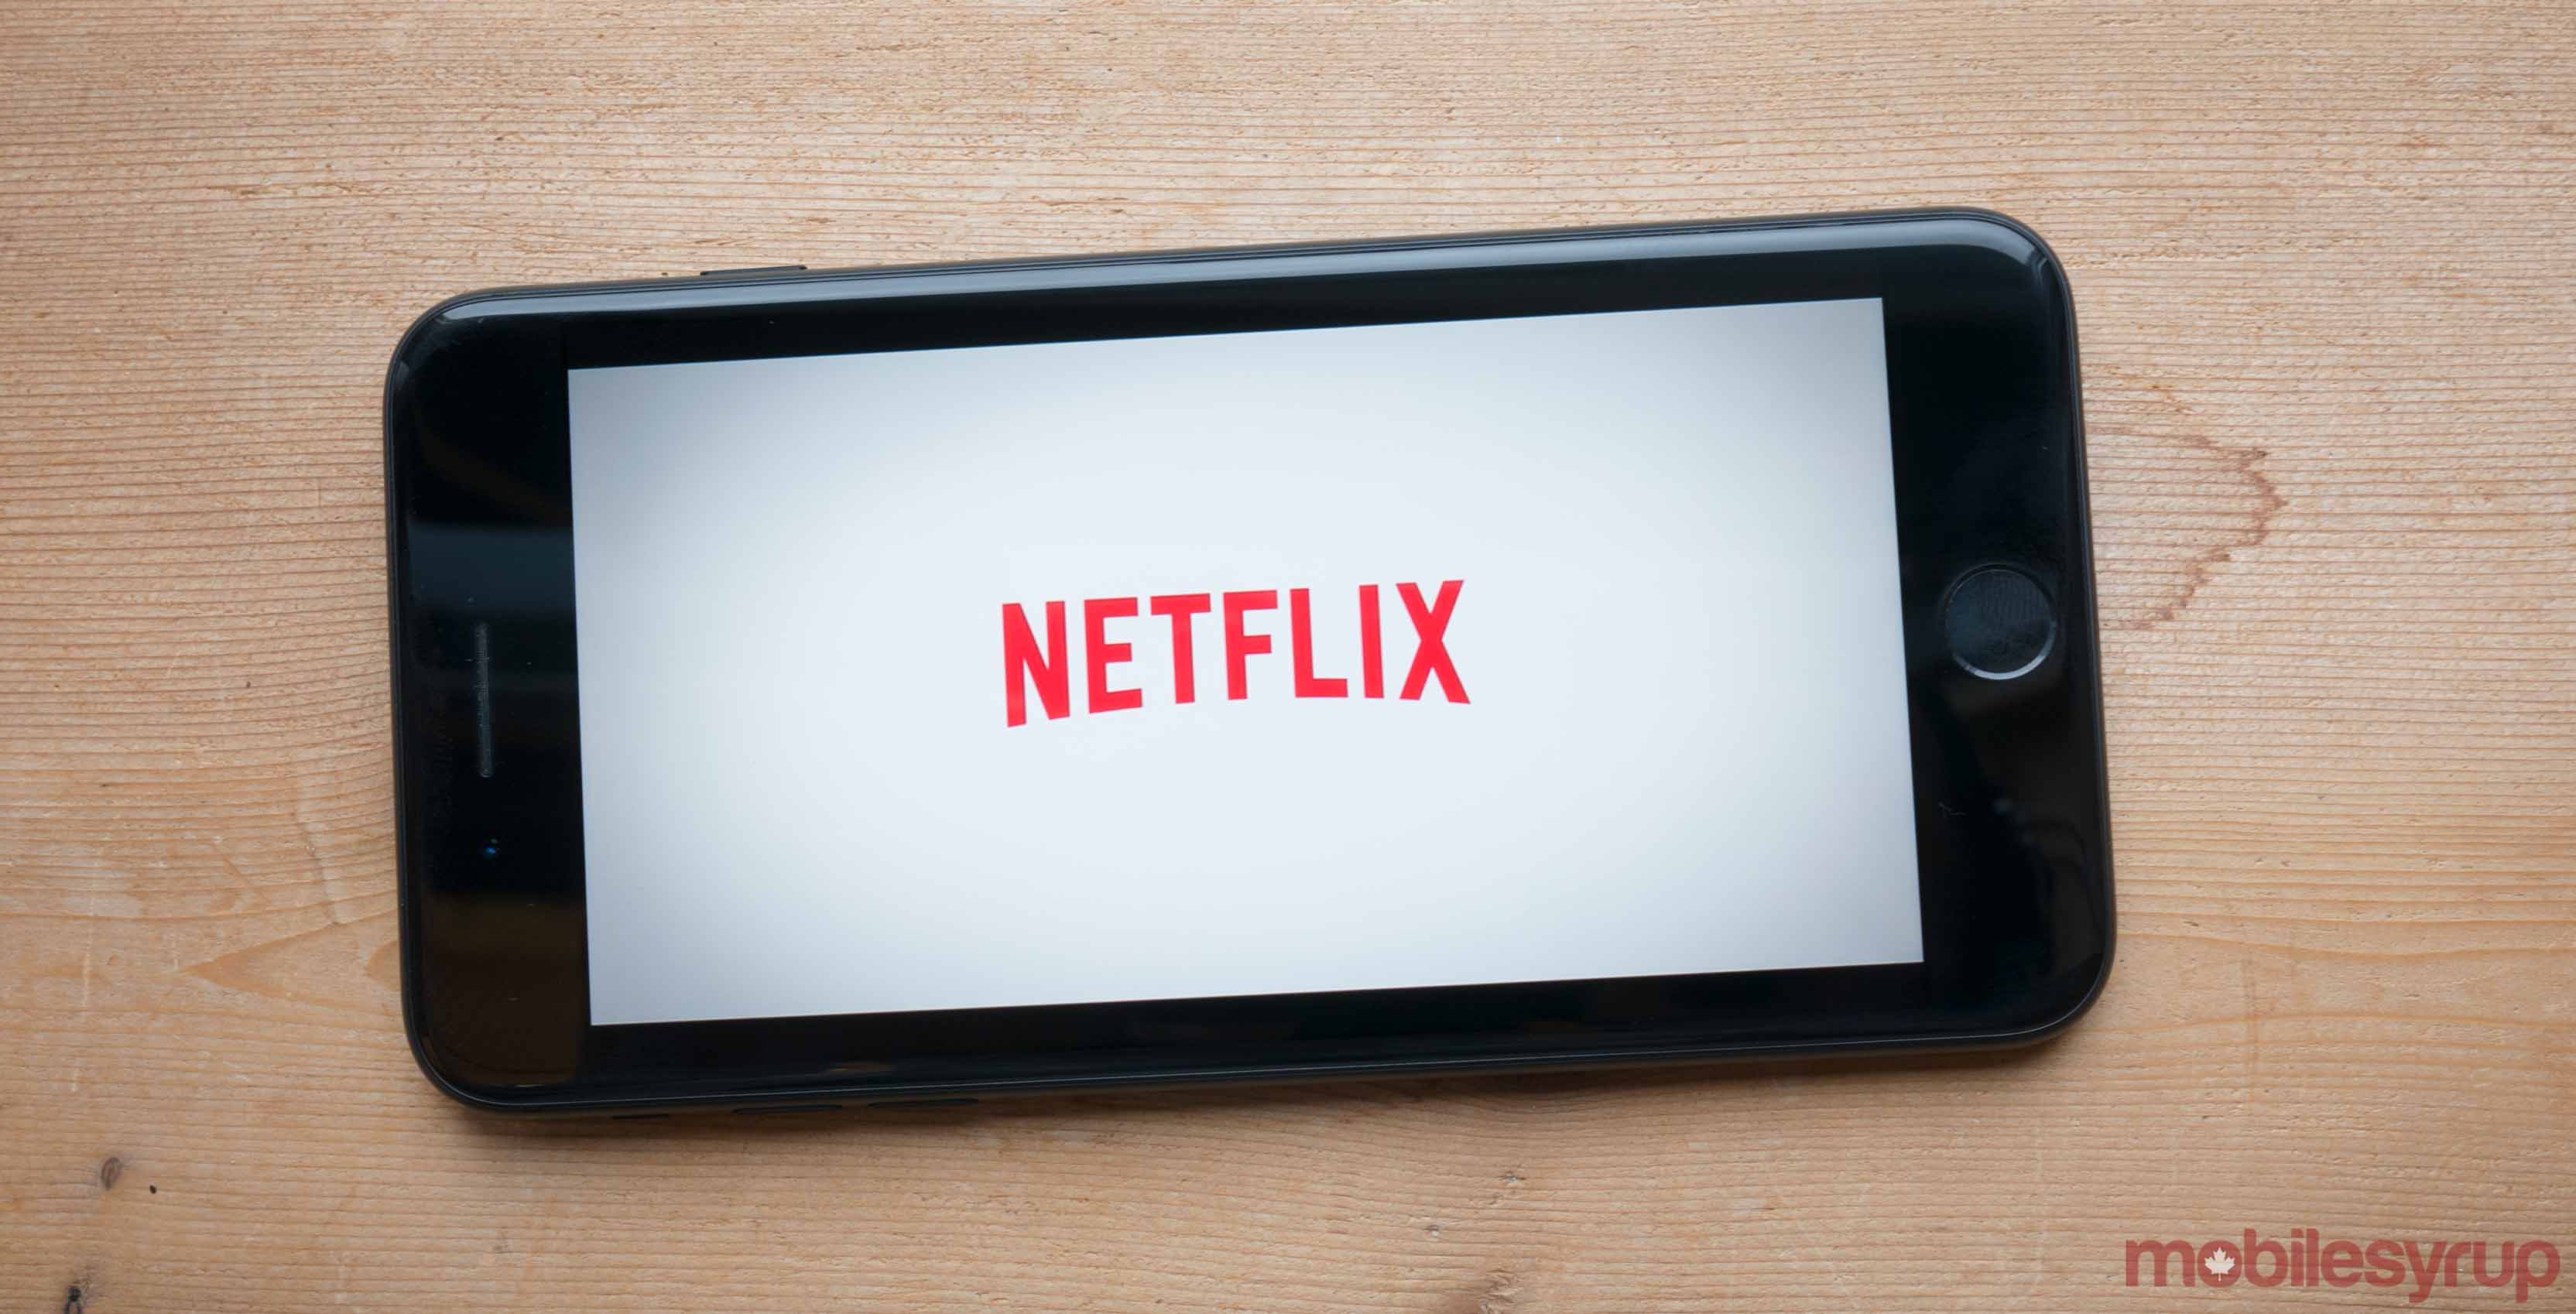 Netflix to stream two Rogers shows